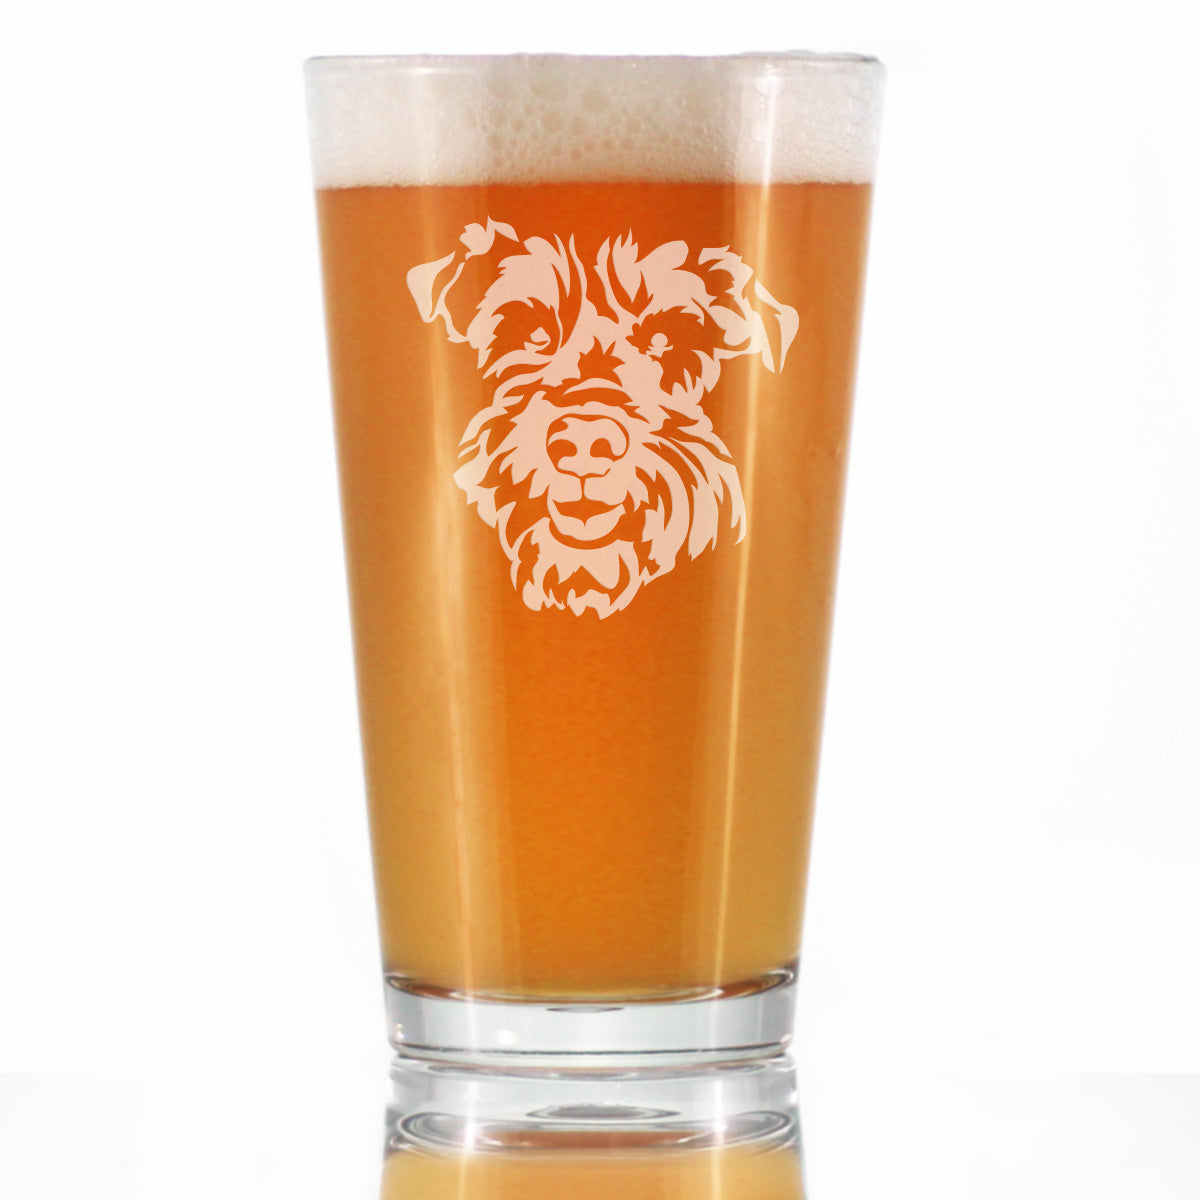 Schnauzer Face Pint Glass for Beer - Unique Dog Themed Decor and Gifts for Moms &amp; Dads of Schnauzers - 16 Oz